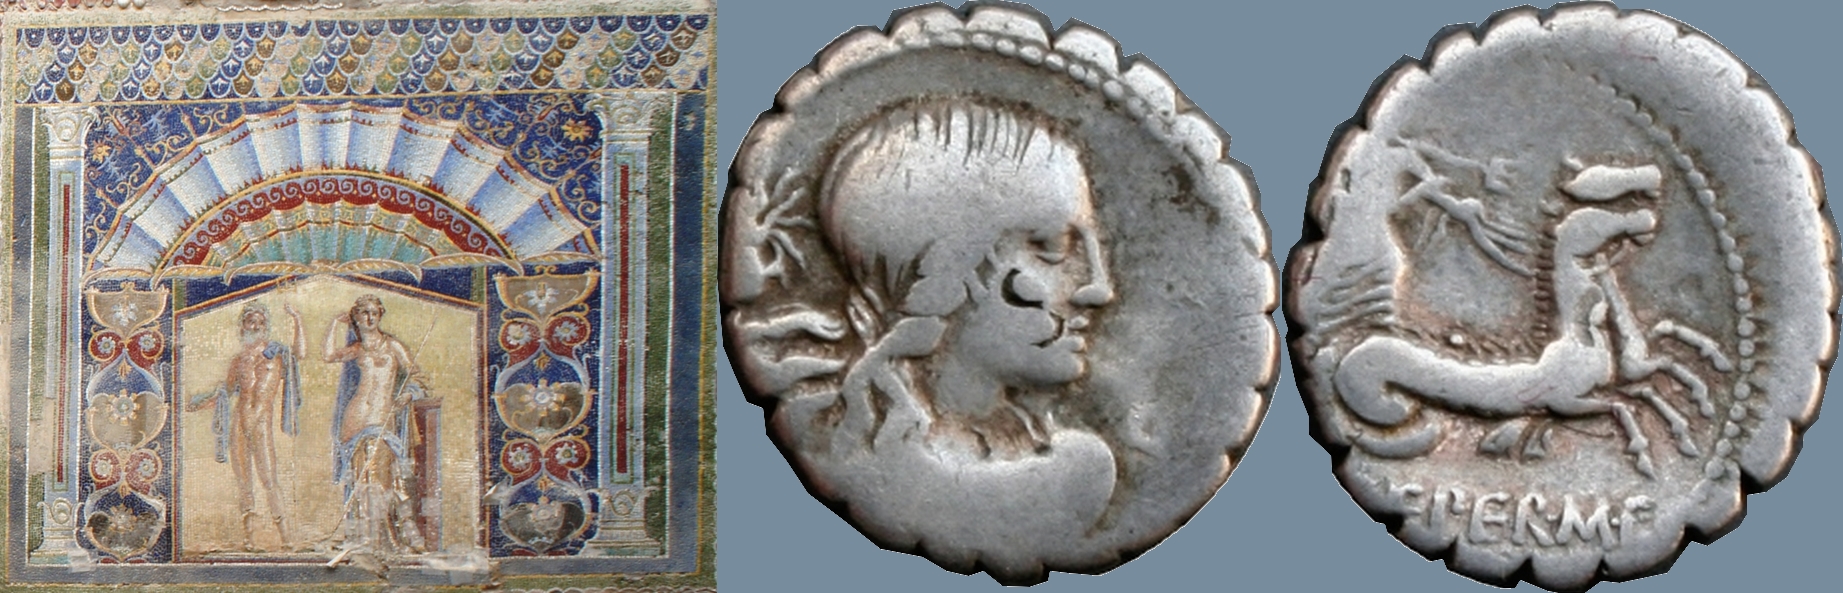 69BC 399/1 coin of Creperius with Neptune and Amphitrite, and mosaic of Neptune and Amphitrite at the eponymous house in Herculaneum